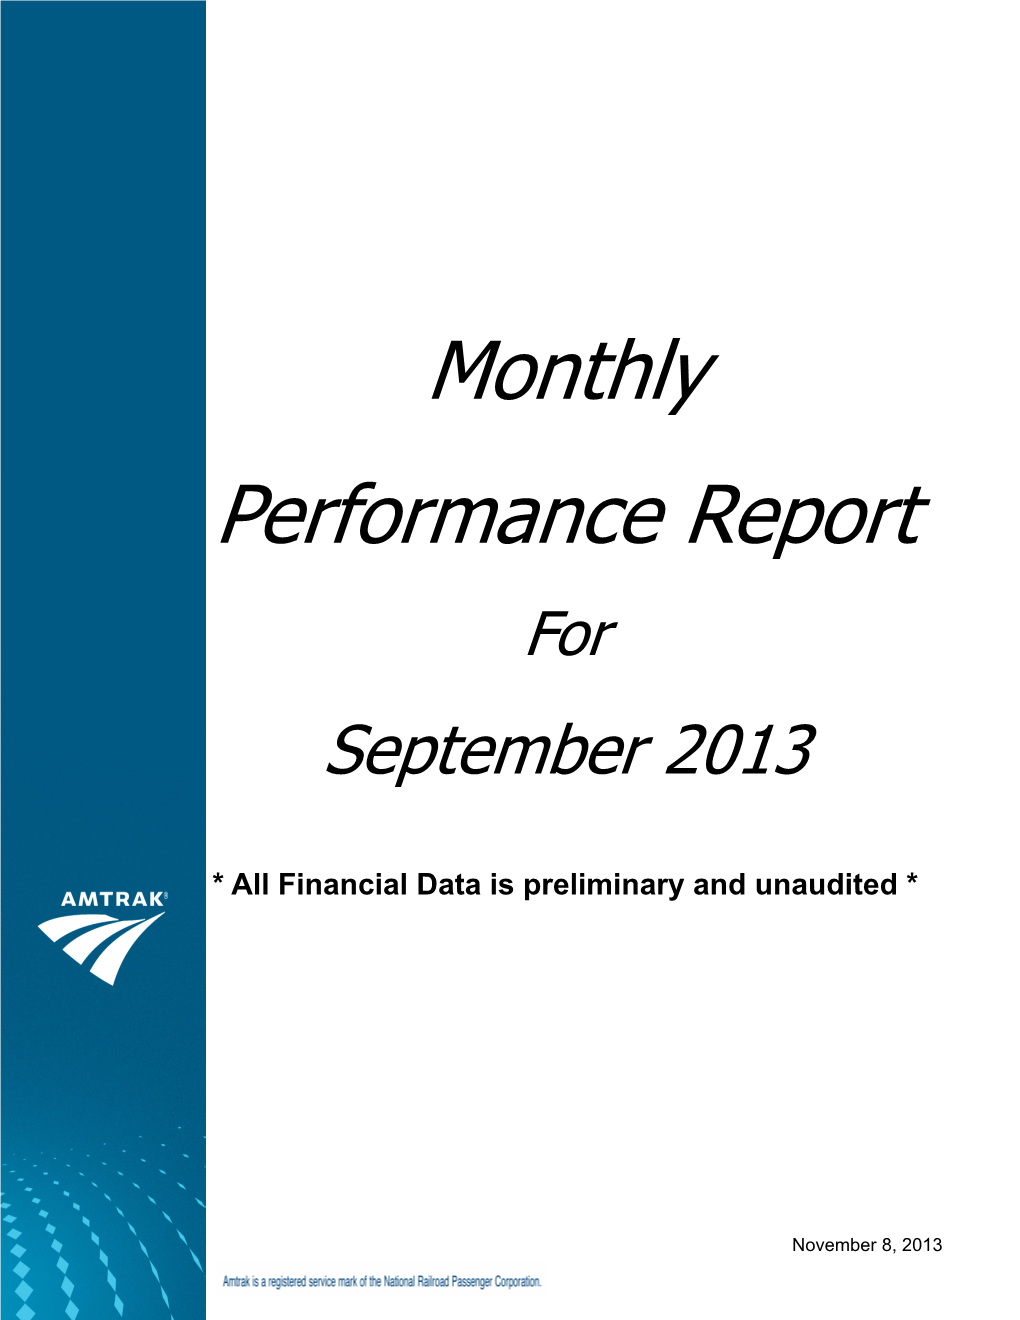 Monthly Performance Report for September 2013